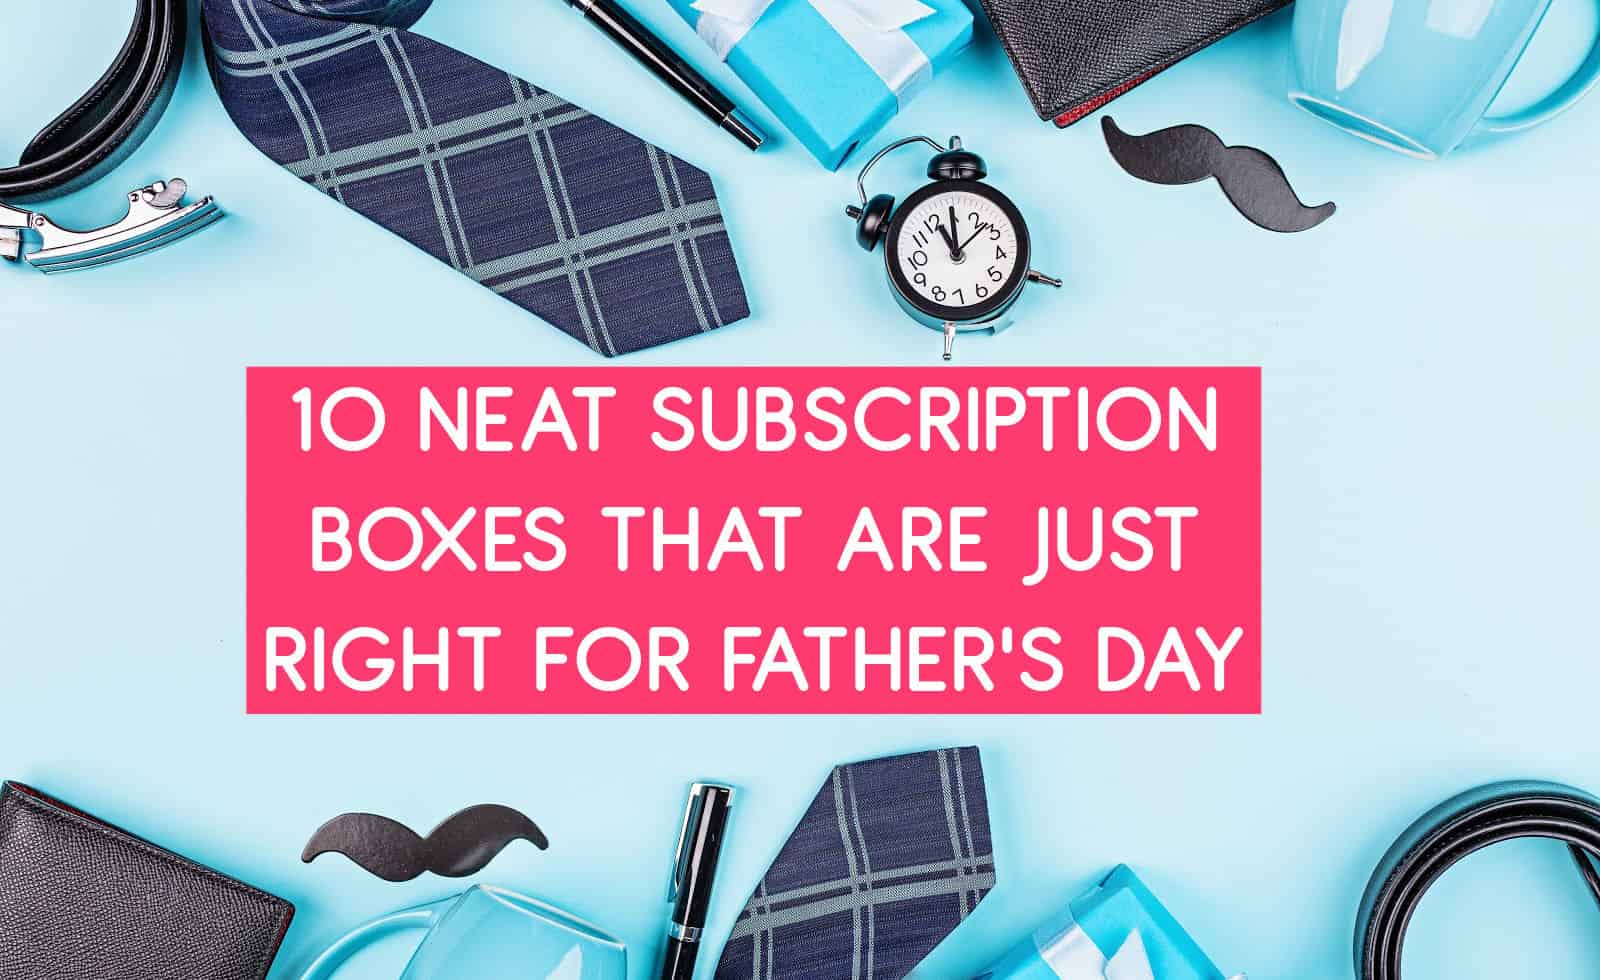 Father's Day gift ideas: subscription boxes he'll love